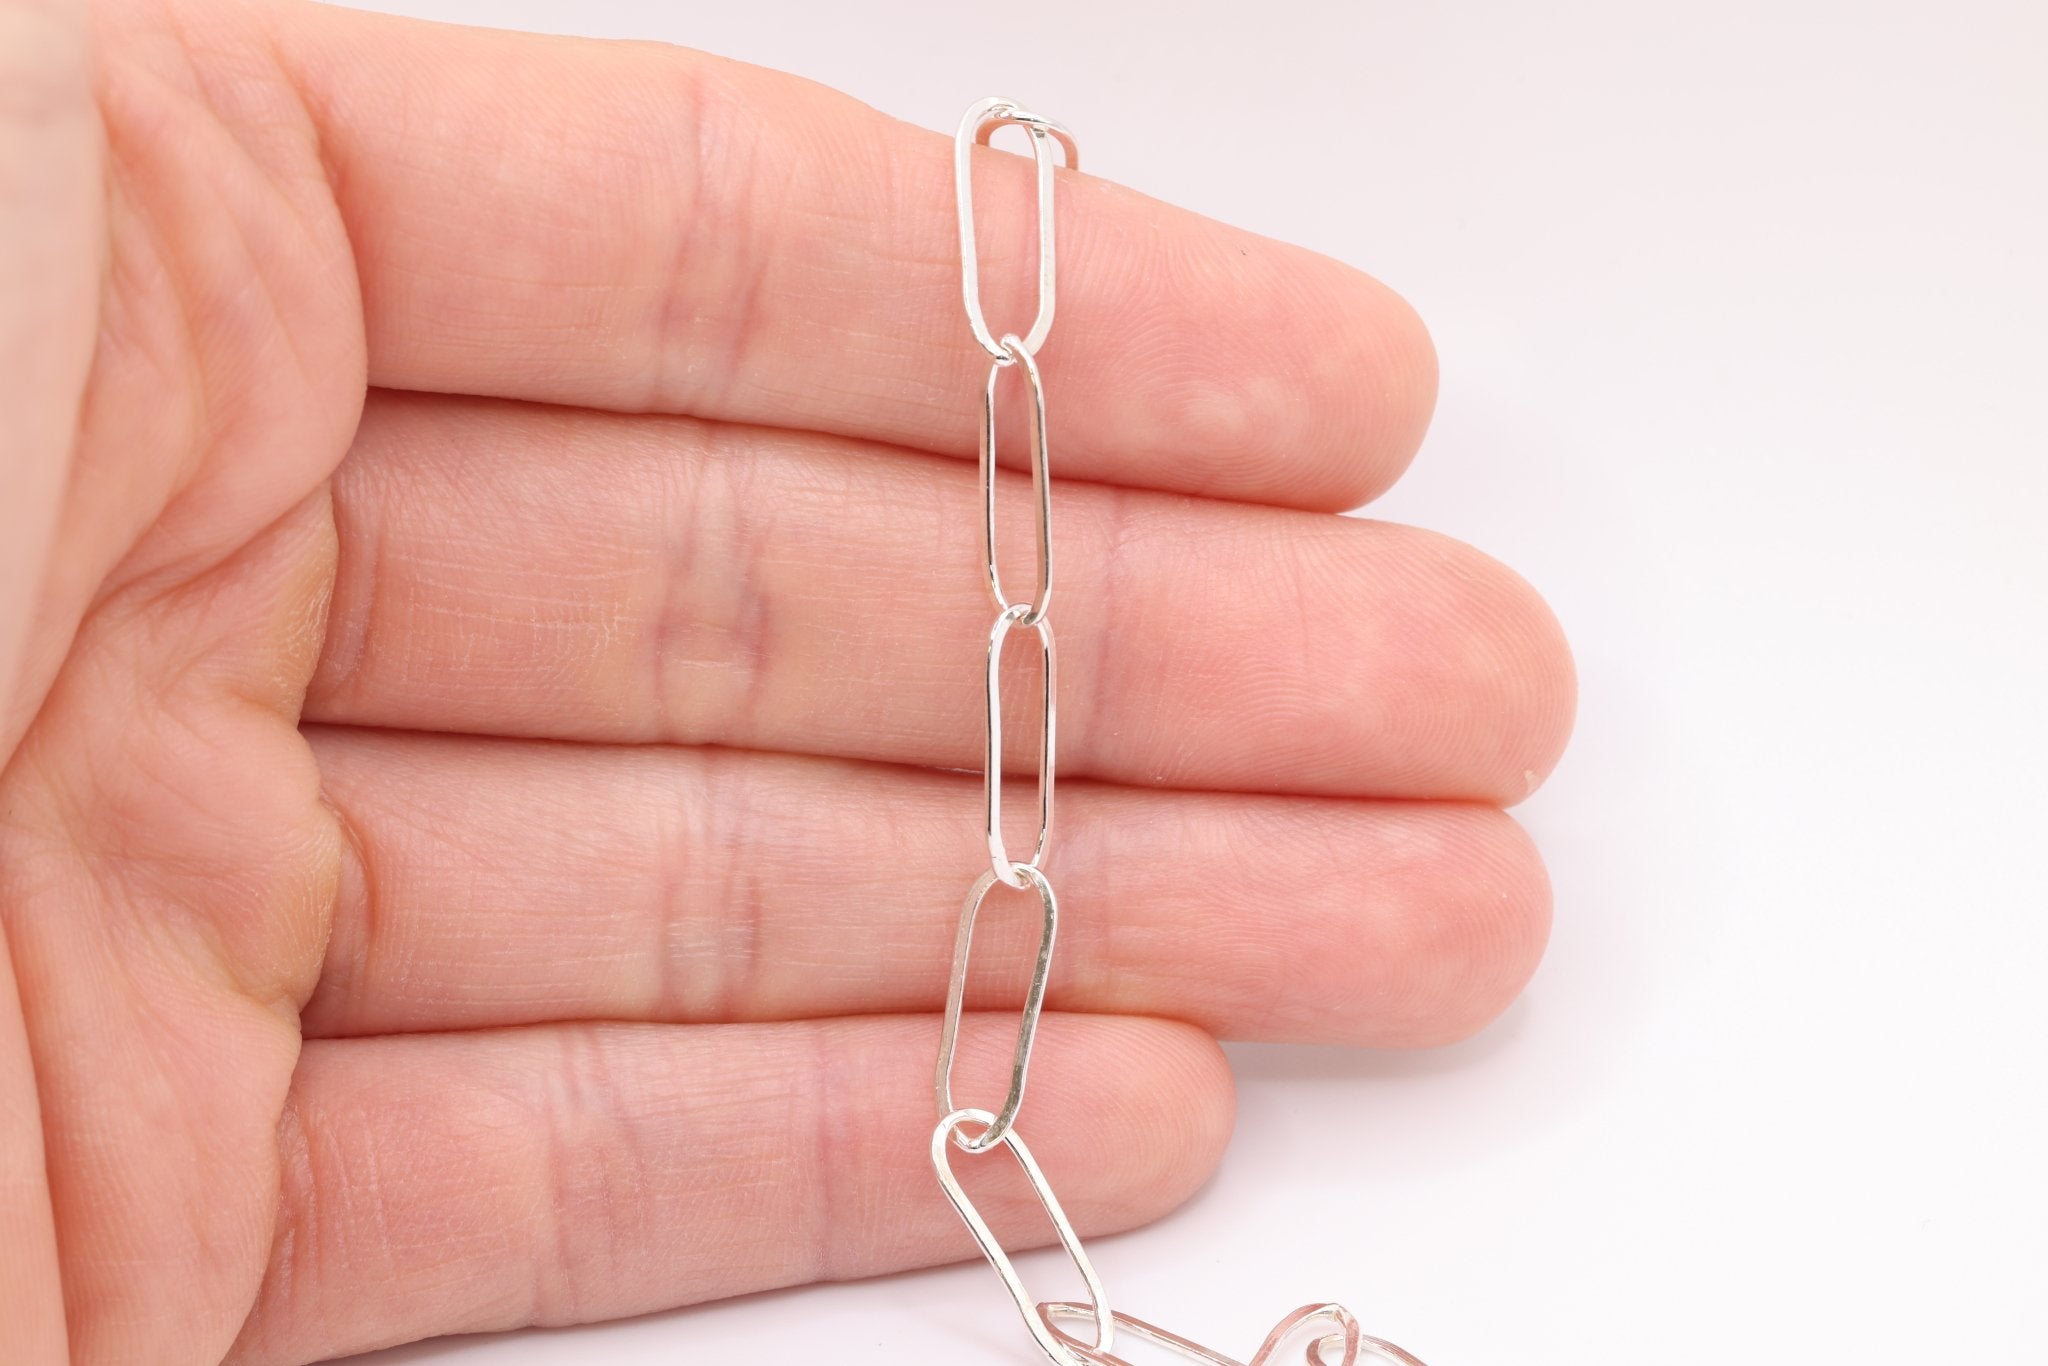 6mm x 15mm Drawn Flat Cable Chain, 925 Sterling Silver, Spool or Footage Rectangle Chain Link Paperclip Chain - HarperCrown